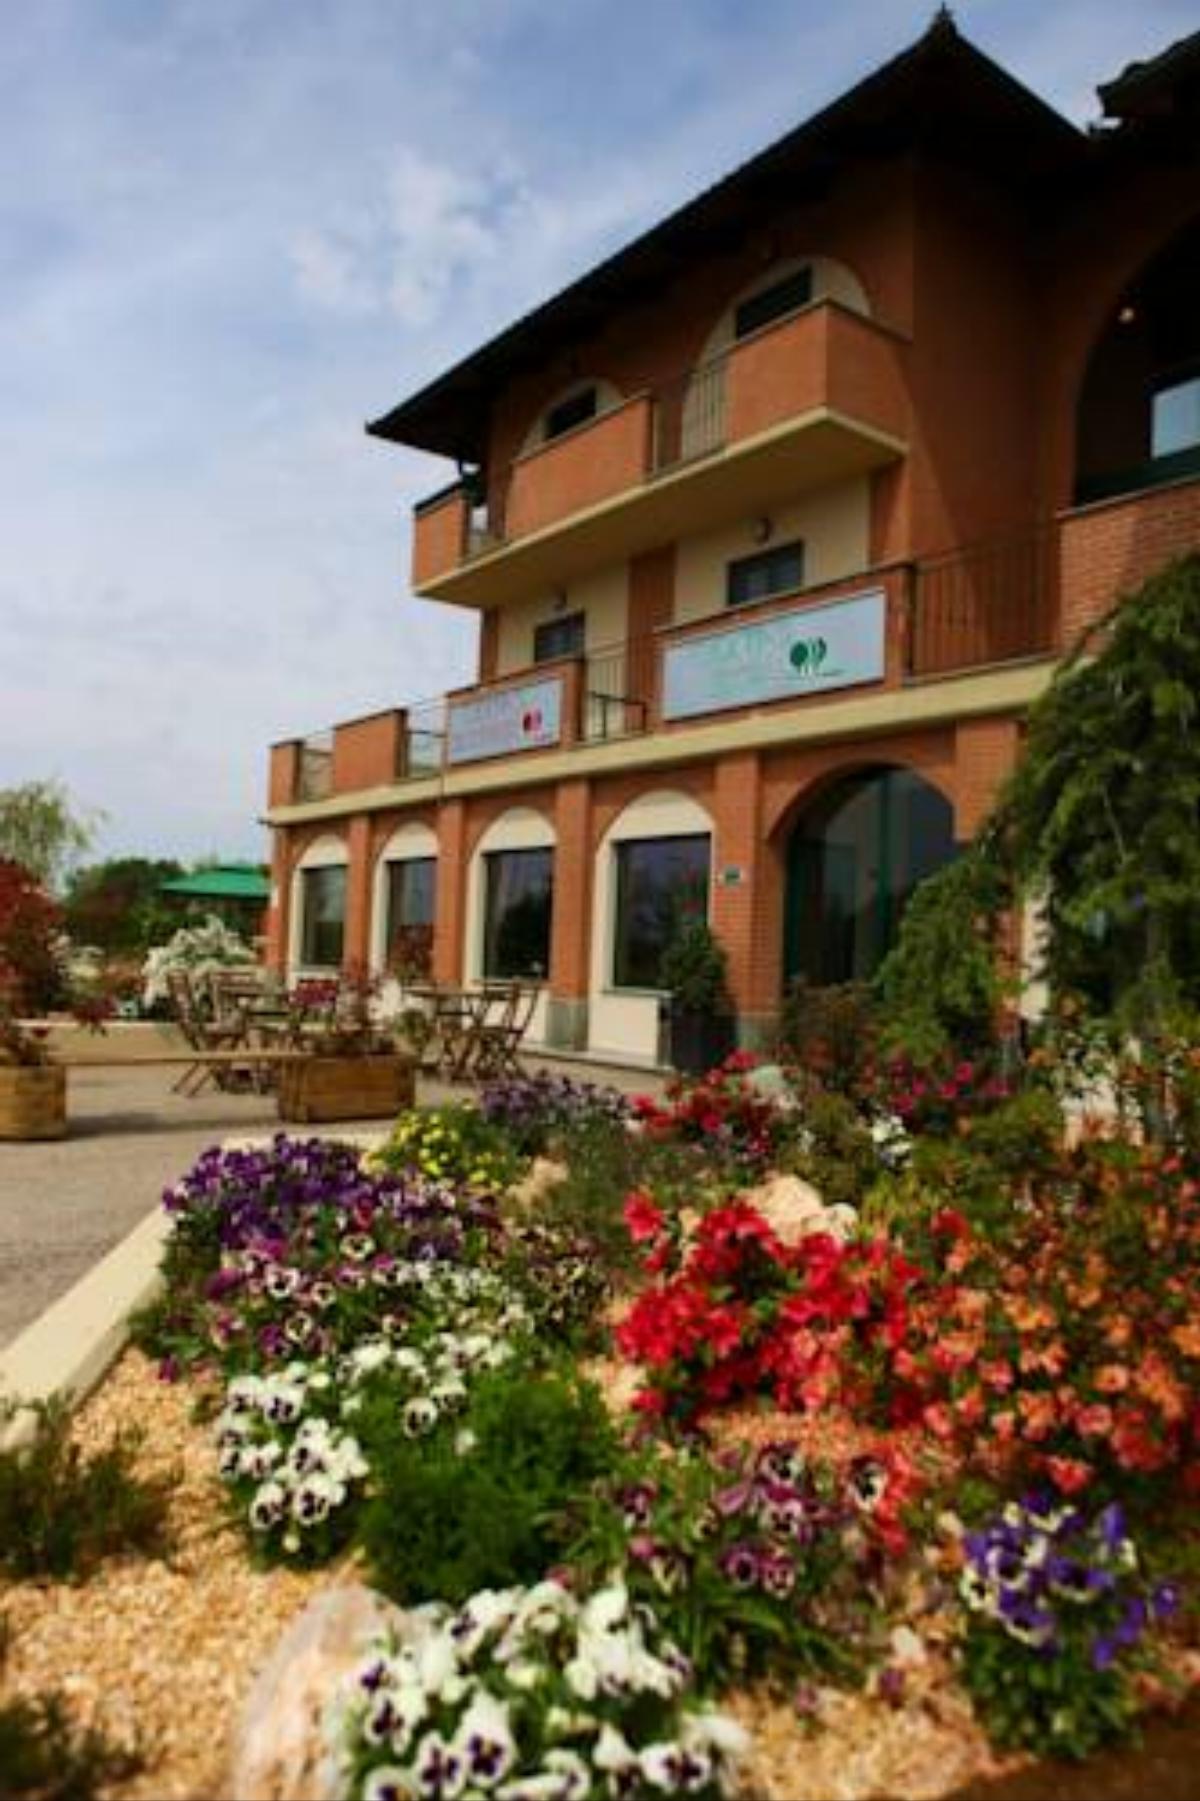 Best Quality Hotel Candiolo Hotel Candiolo Italy